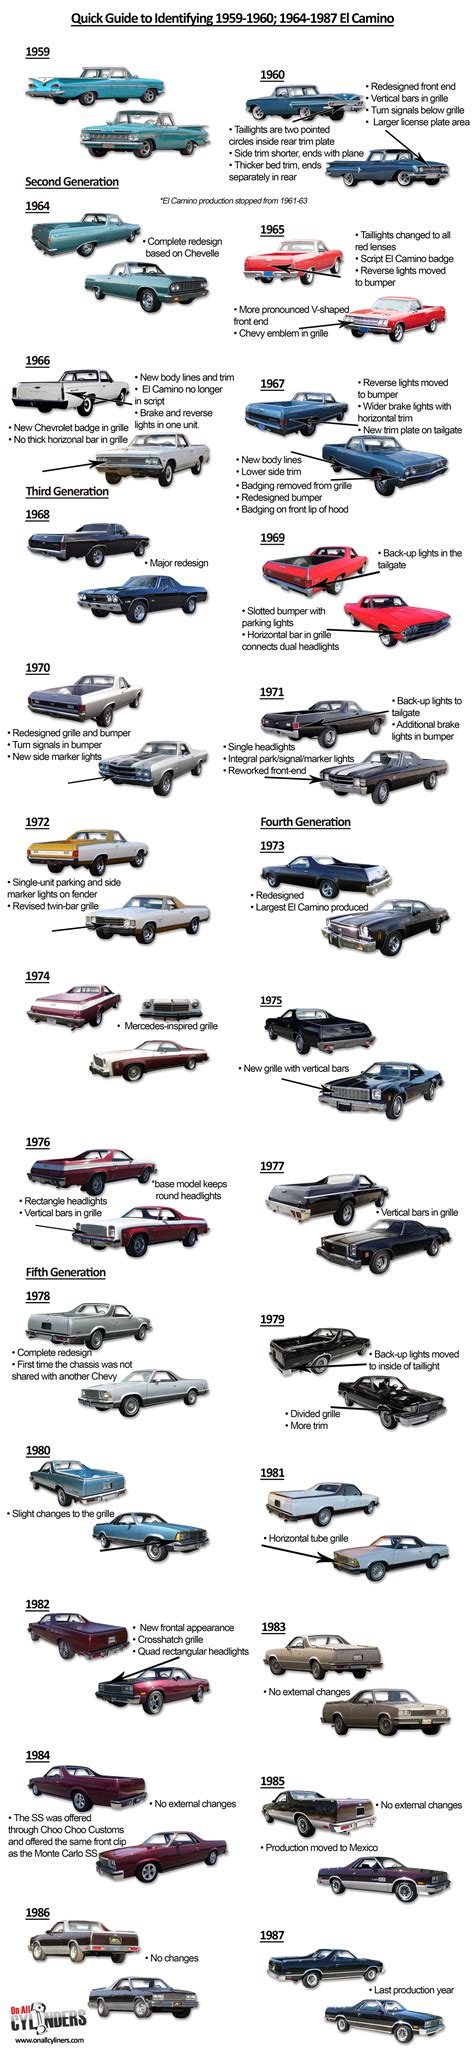 Ride Guides A Quick Guide To Identifying Chevy El Camino Model Years